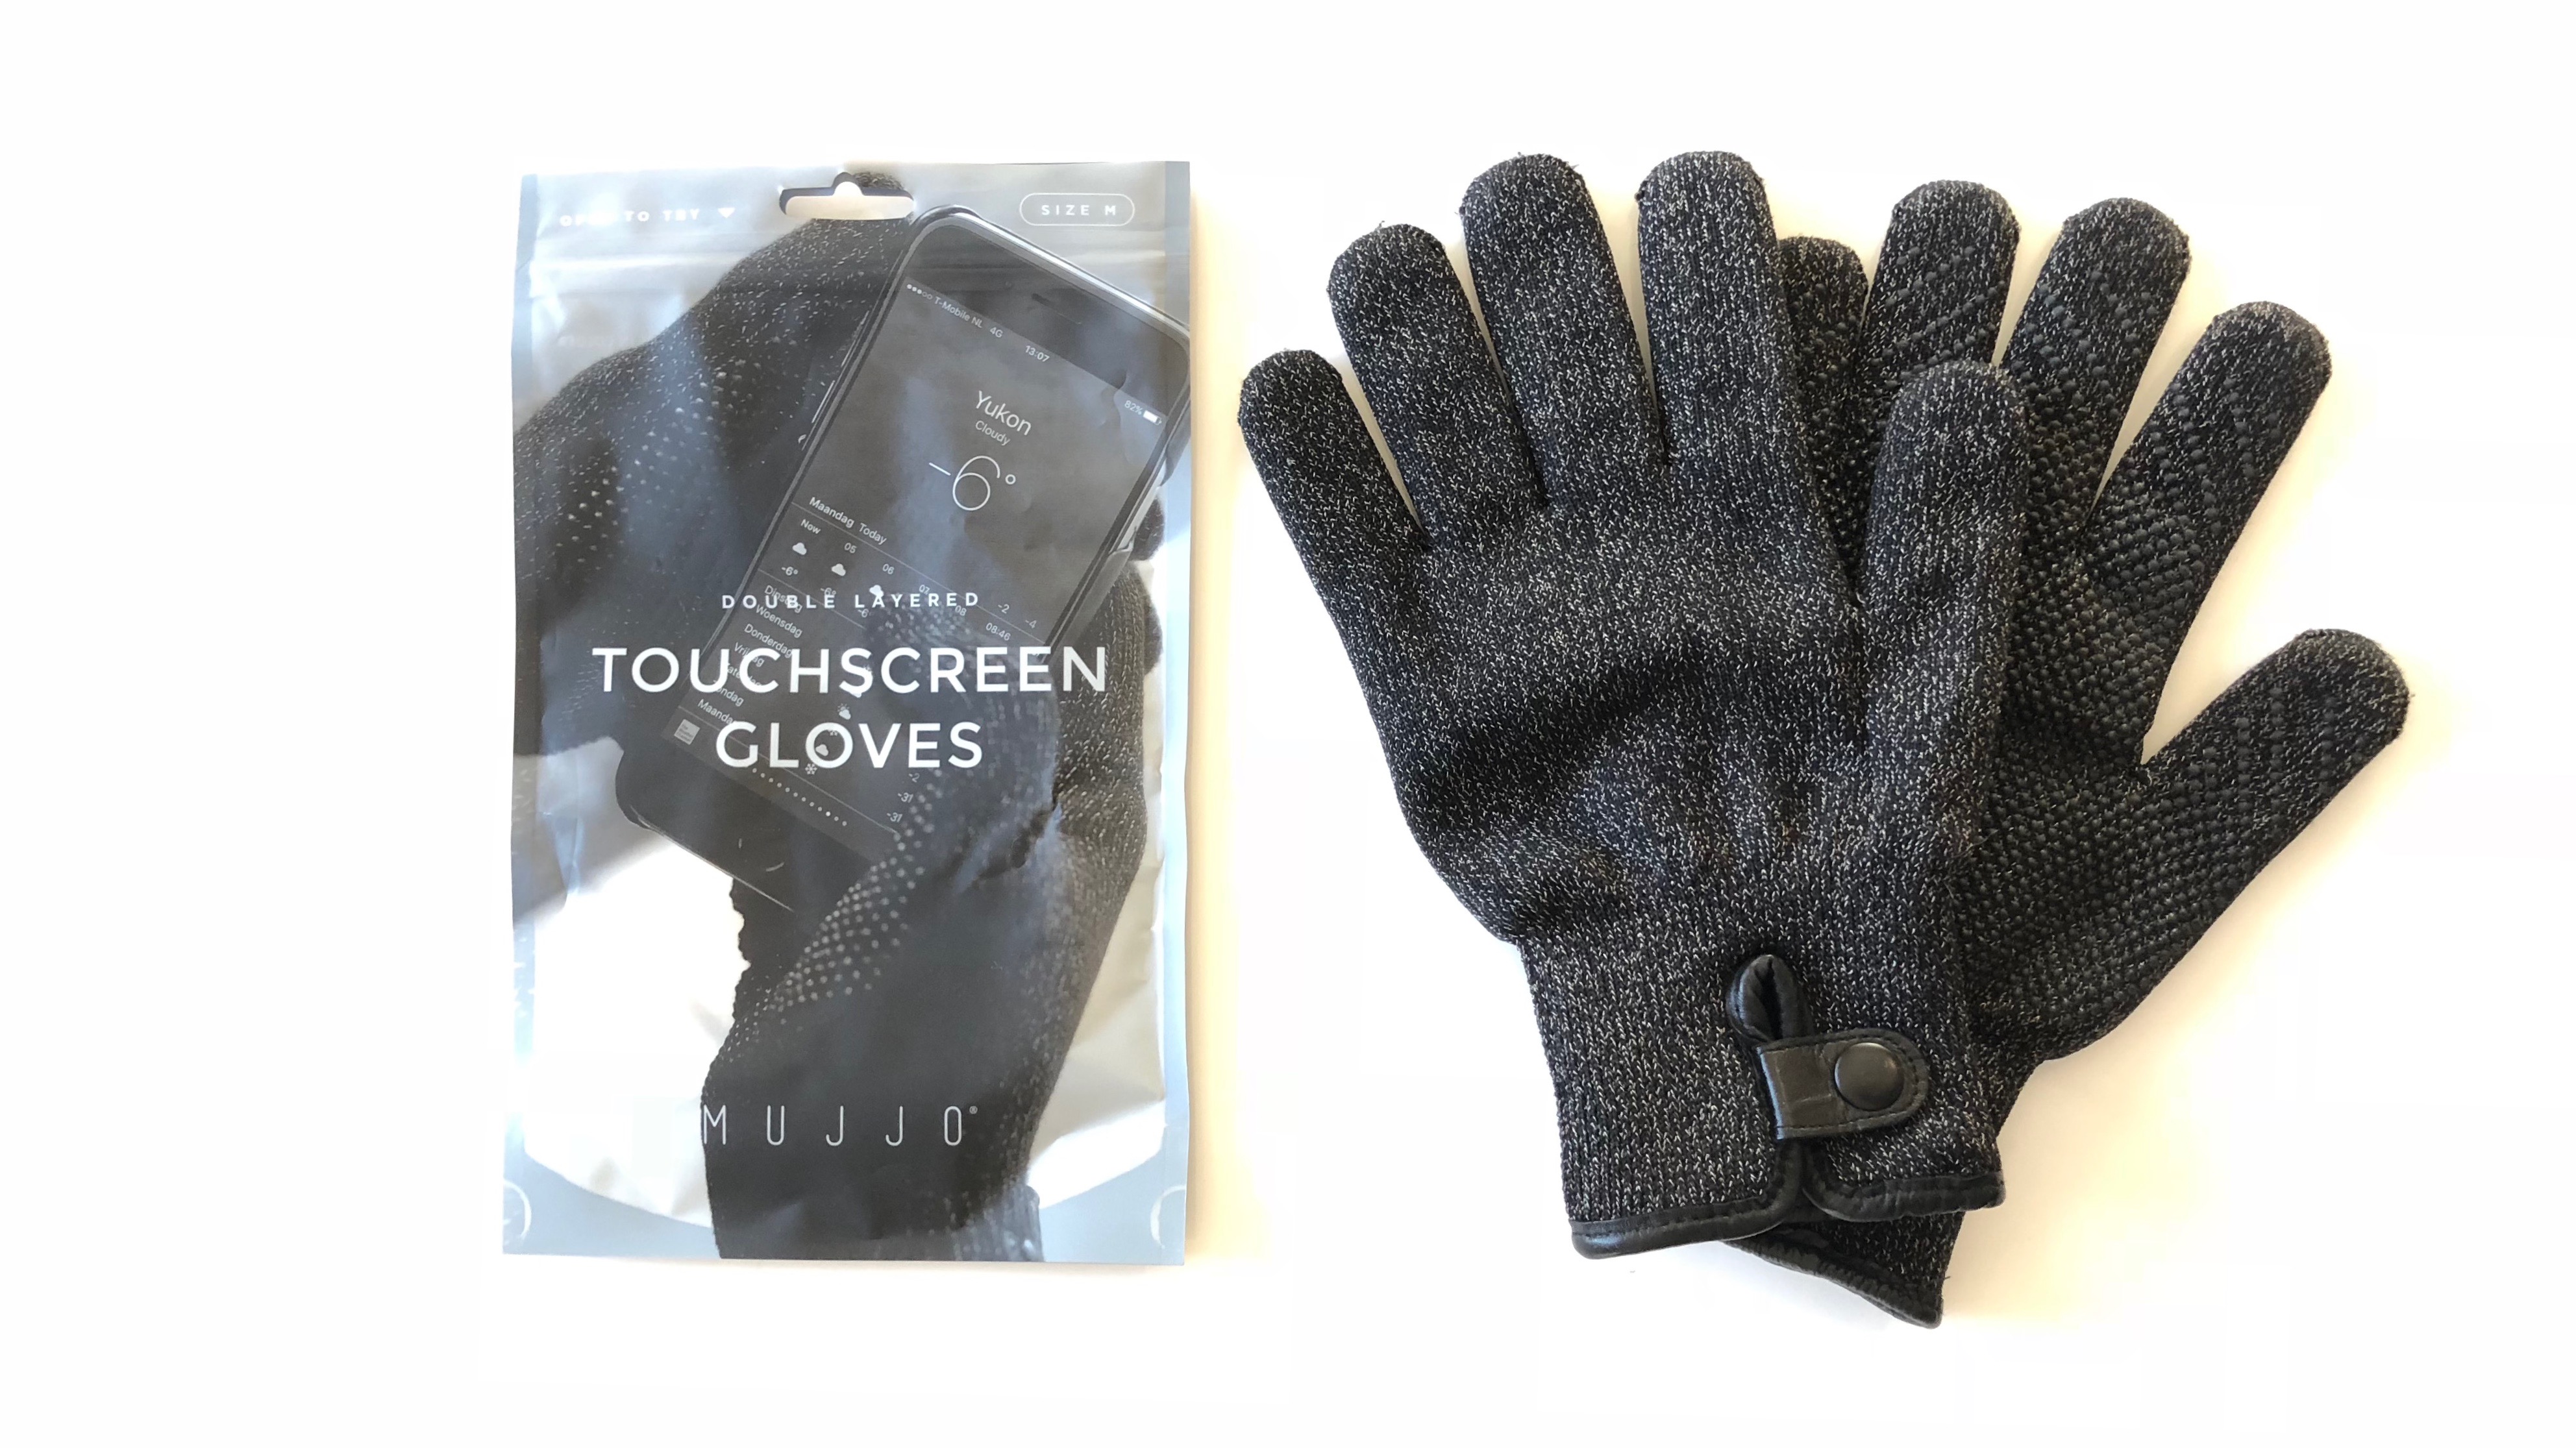 Tochi træ Uskyld Observatory Review: Mujjo's Double Layer Touchscreen Gloves are warm, sharp, and  functional - 9to5Mac